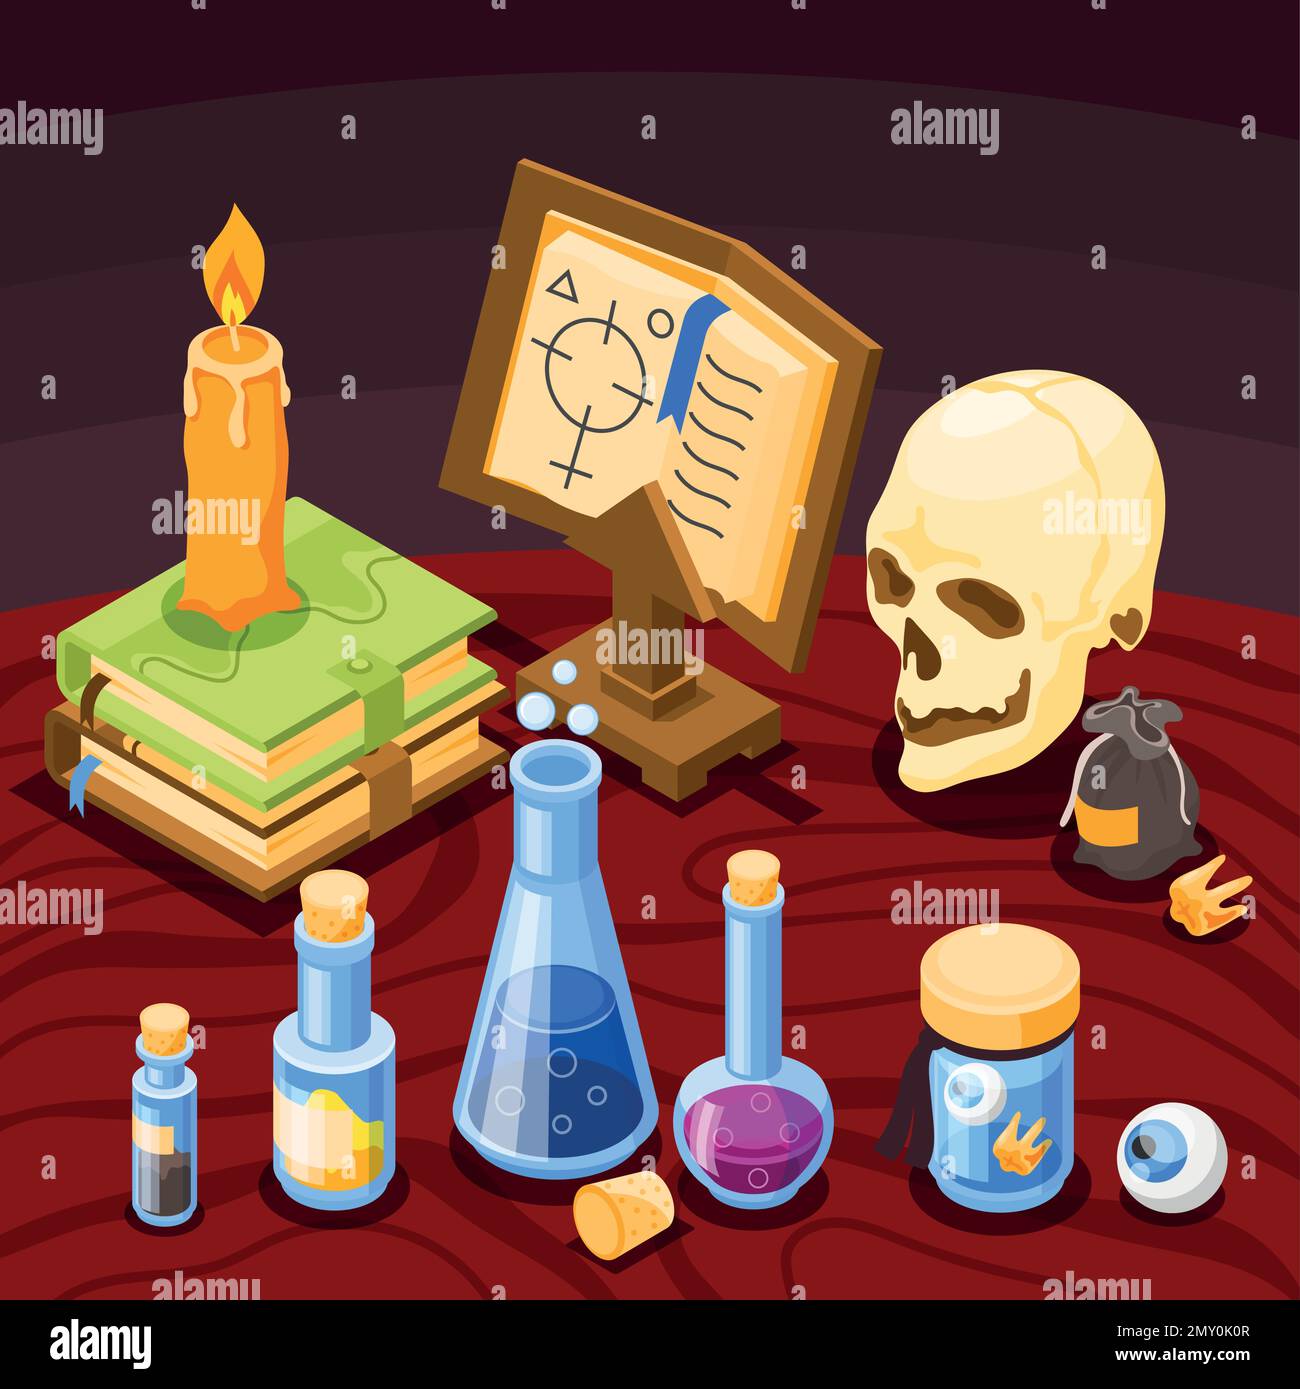 Alchemy magical tools with skull old books candle flasks isometric background 3d vector illustration Stock Vector